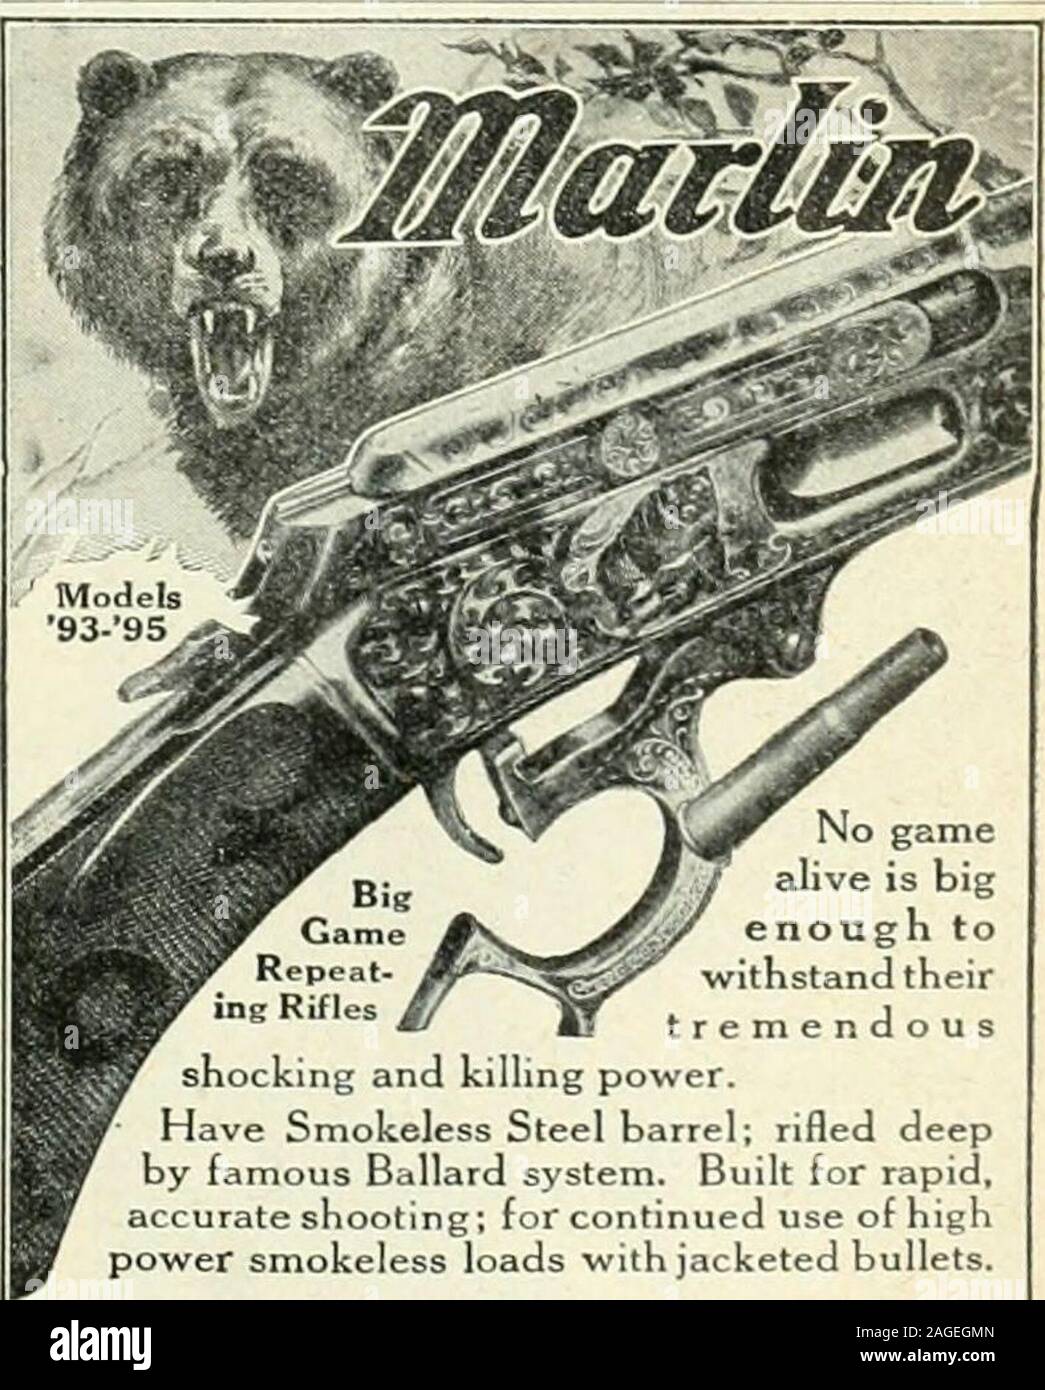 rod-and-gun-no-game-alive-is-big-enough-to-withstand-their-tremendous-shocking-and-killing-power-have-smokeless-steel-barrel-rifled-deep-by-famous-ballard-system-built-for-rapid-accurate-shooting-for-continued-use-of-high-power-smokeless-loads-with-jacketed-bullets-solid-top-sideejecting-safe-send-3-stamps-for-catalog-howing-extensiveline-of-7zi3-repeaters-rifles-and-shotguns-the-marlin-firearms-co-sevtclncjnn-520-rod-and-gun-in-canada-14-1615-14-1615-2047-15-is48-14-1947-13-1745-15-2050-12-1845-11-2046-15-1916-15-1916-12-2047-15-1236-11-1743-t-paslorio-2AGEGMN.jpg